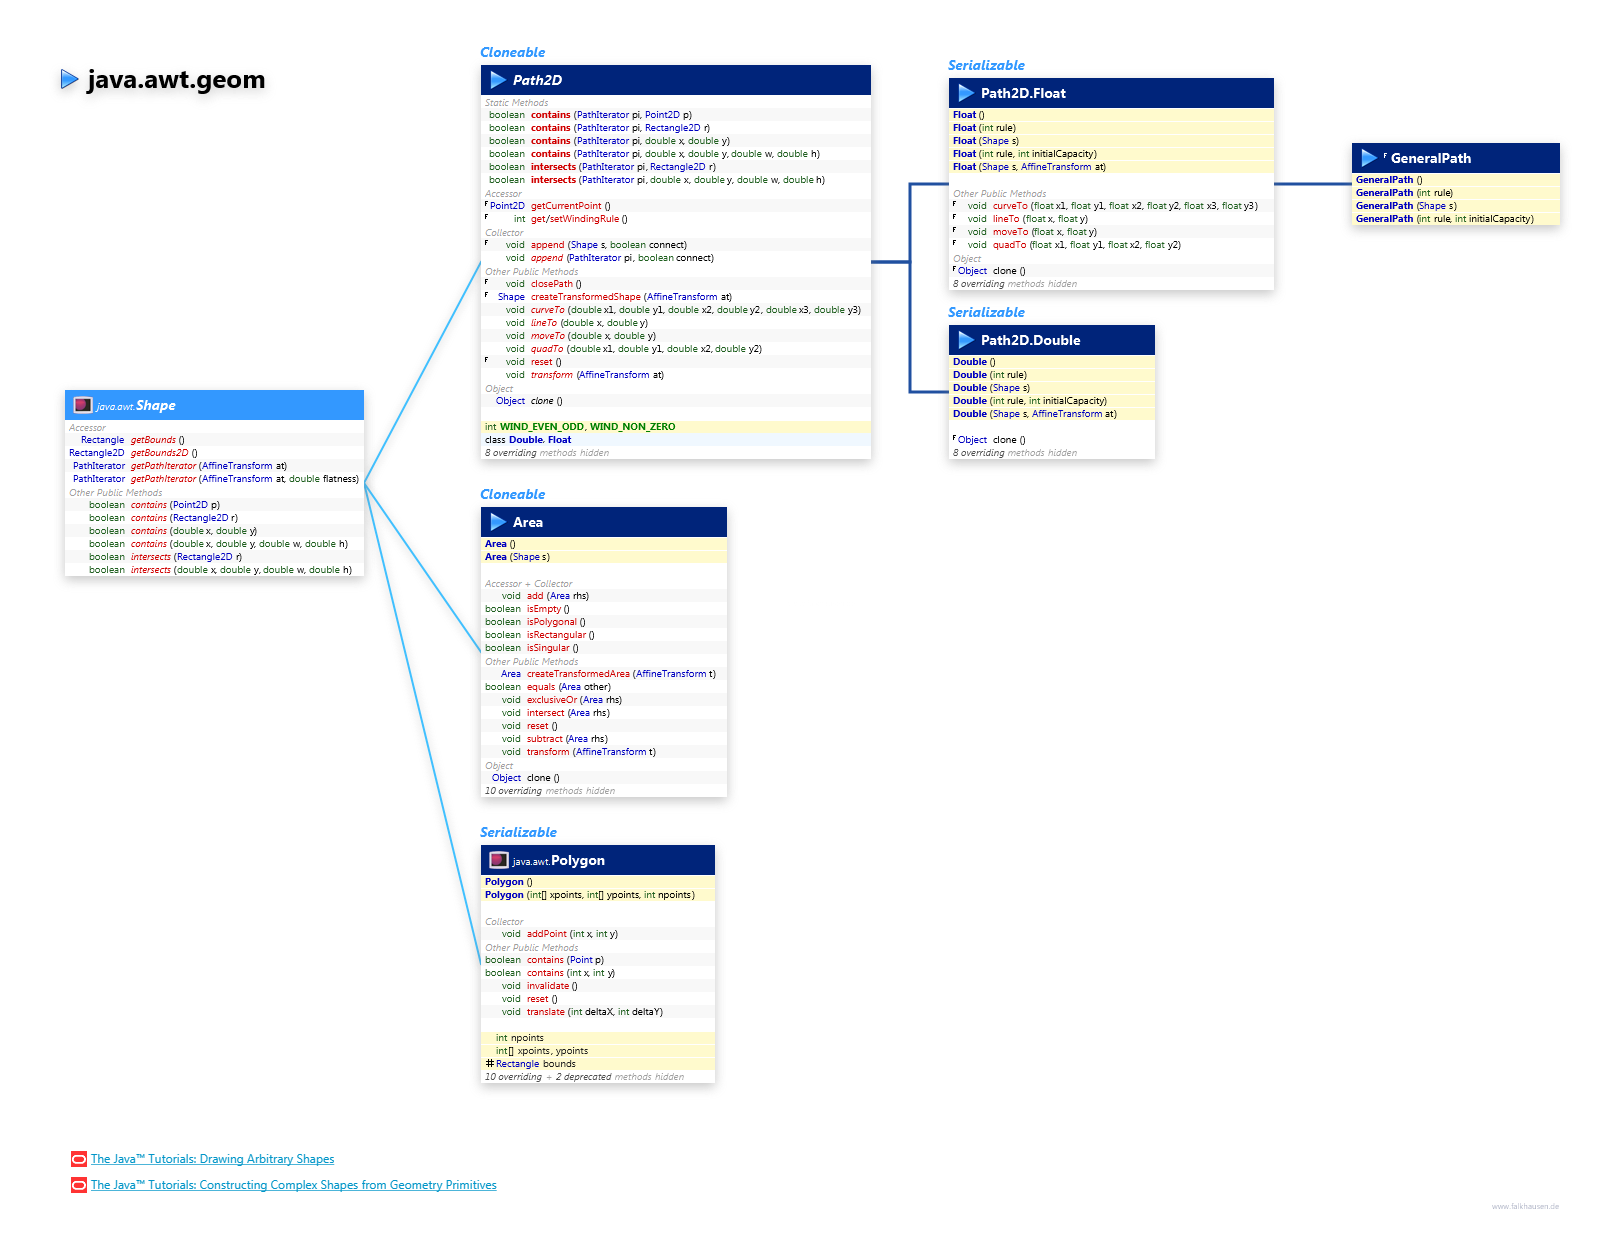 java.awt.geom Misc Shapes class diagram and api documentation for Java 7